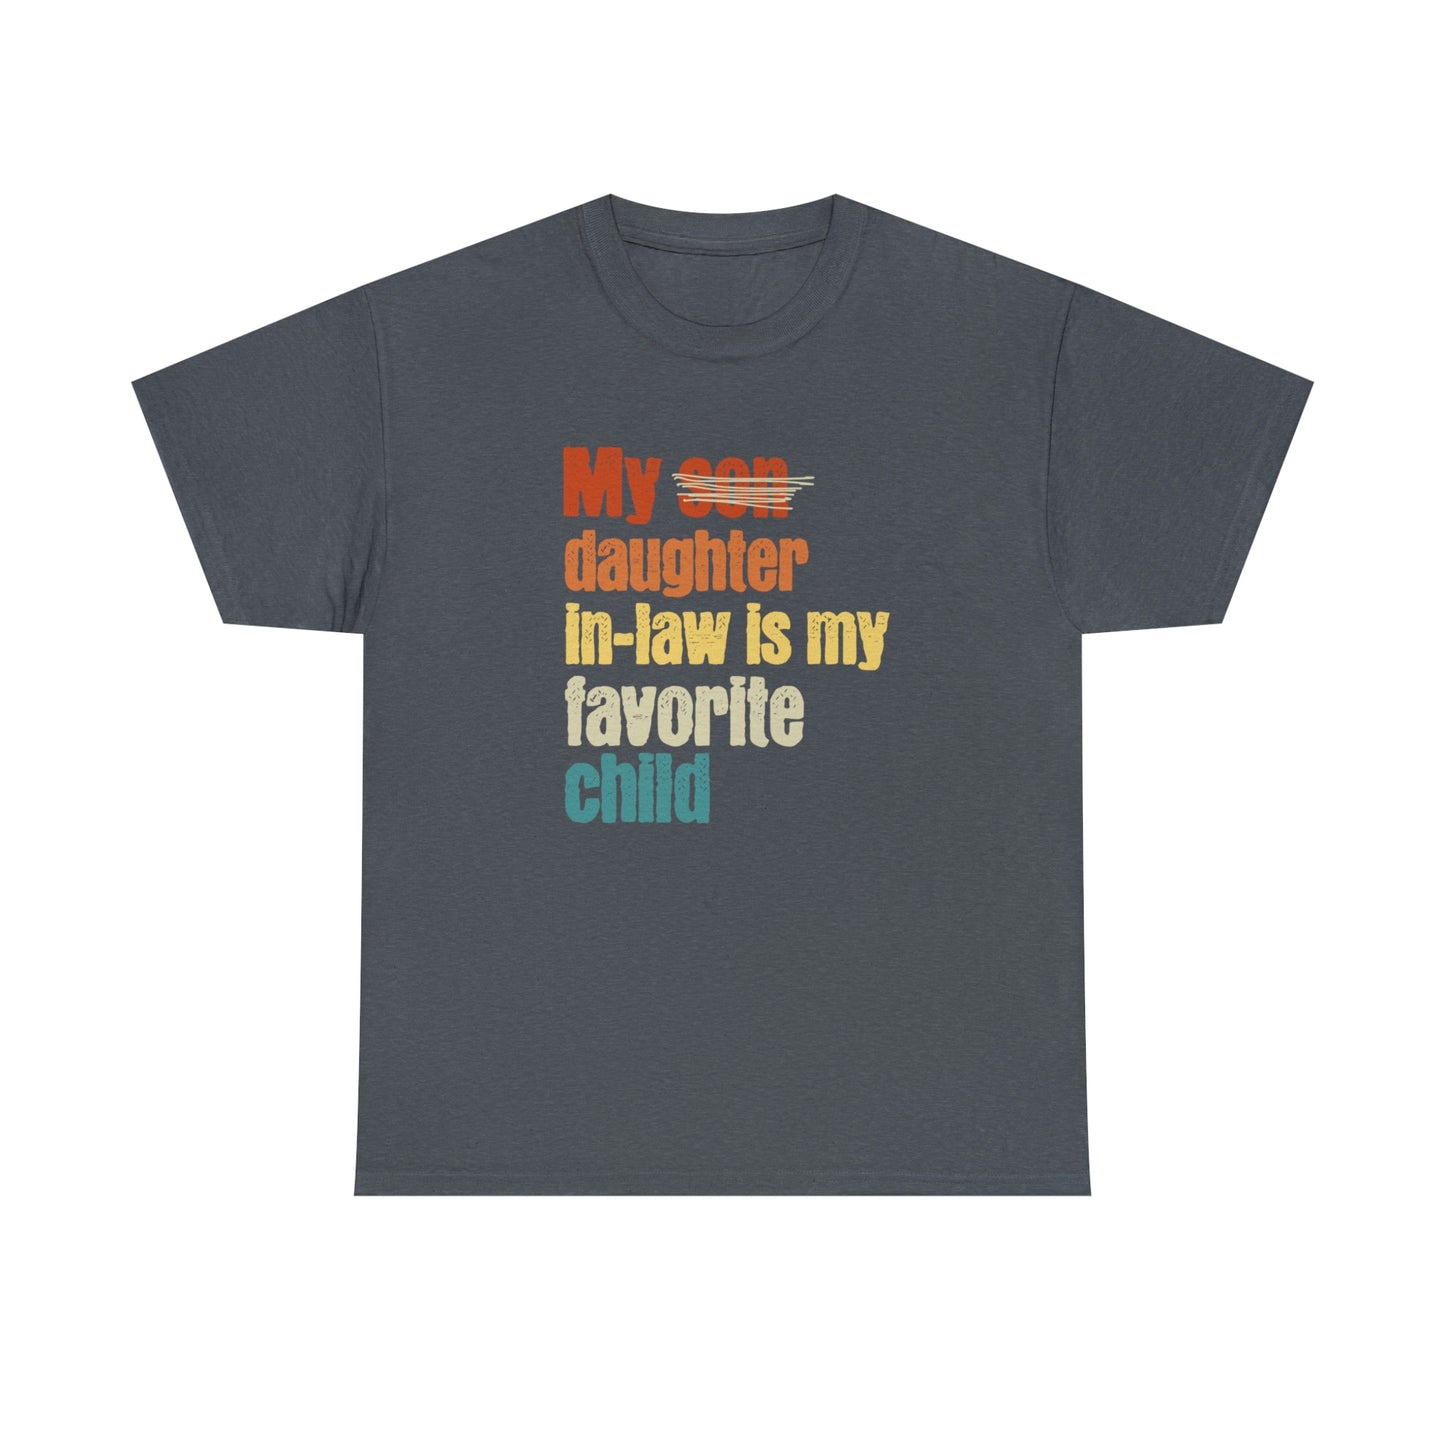 My Daughter-in-law is My Favorite Child, Gift For Father-in-law, Funny Father's Day Shirt, Father of the Groom, From Daughter-in-law